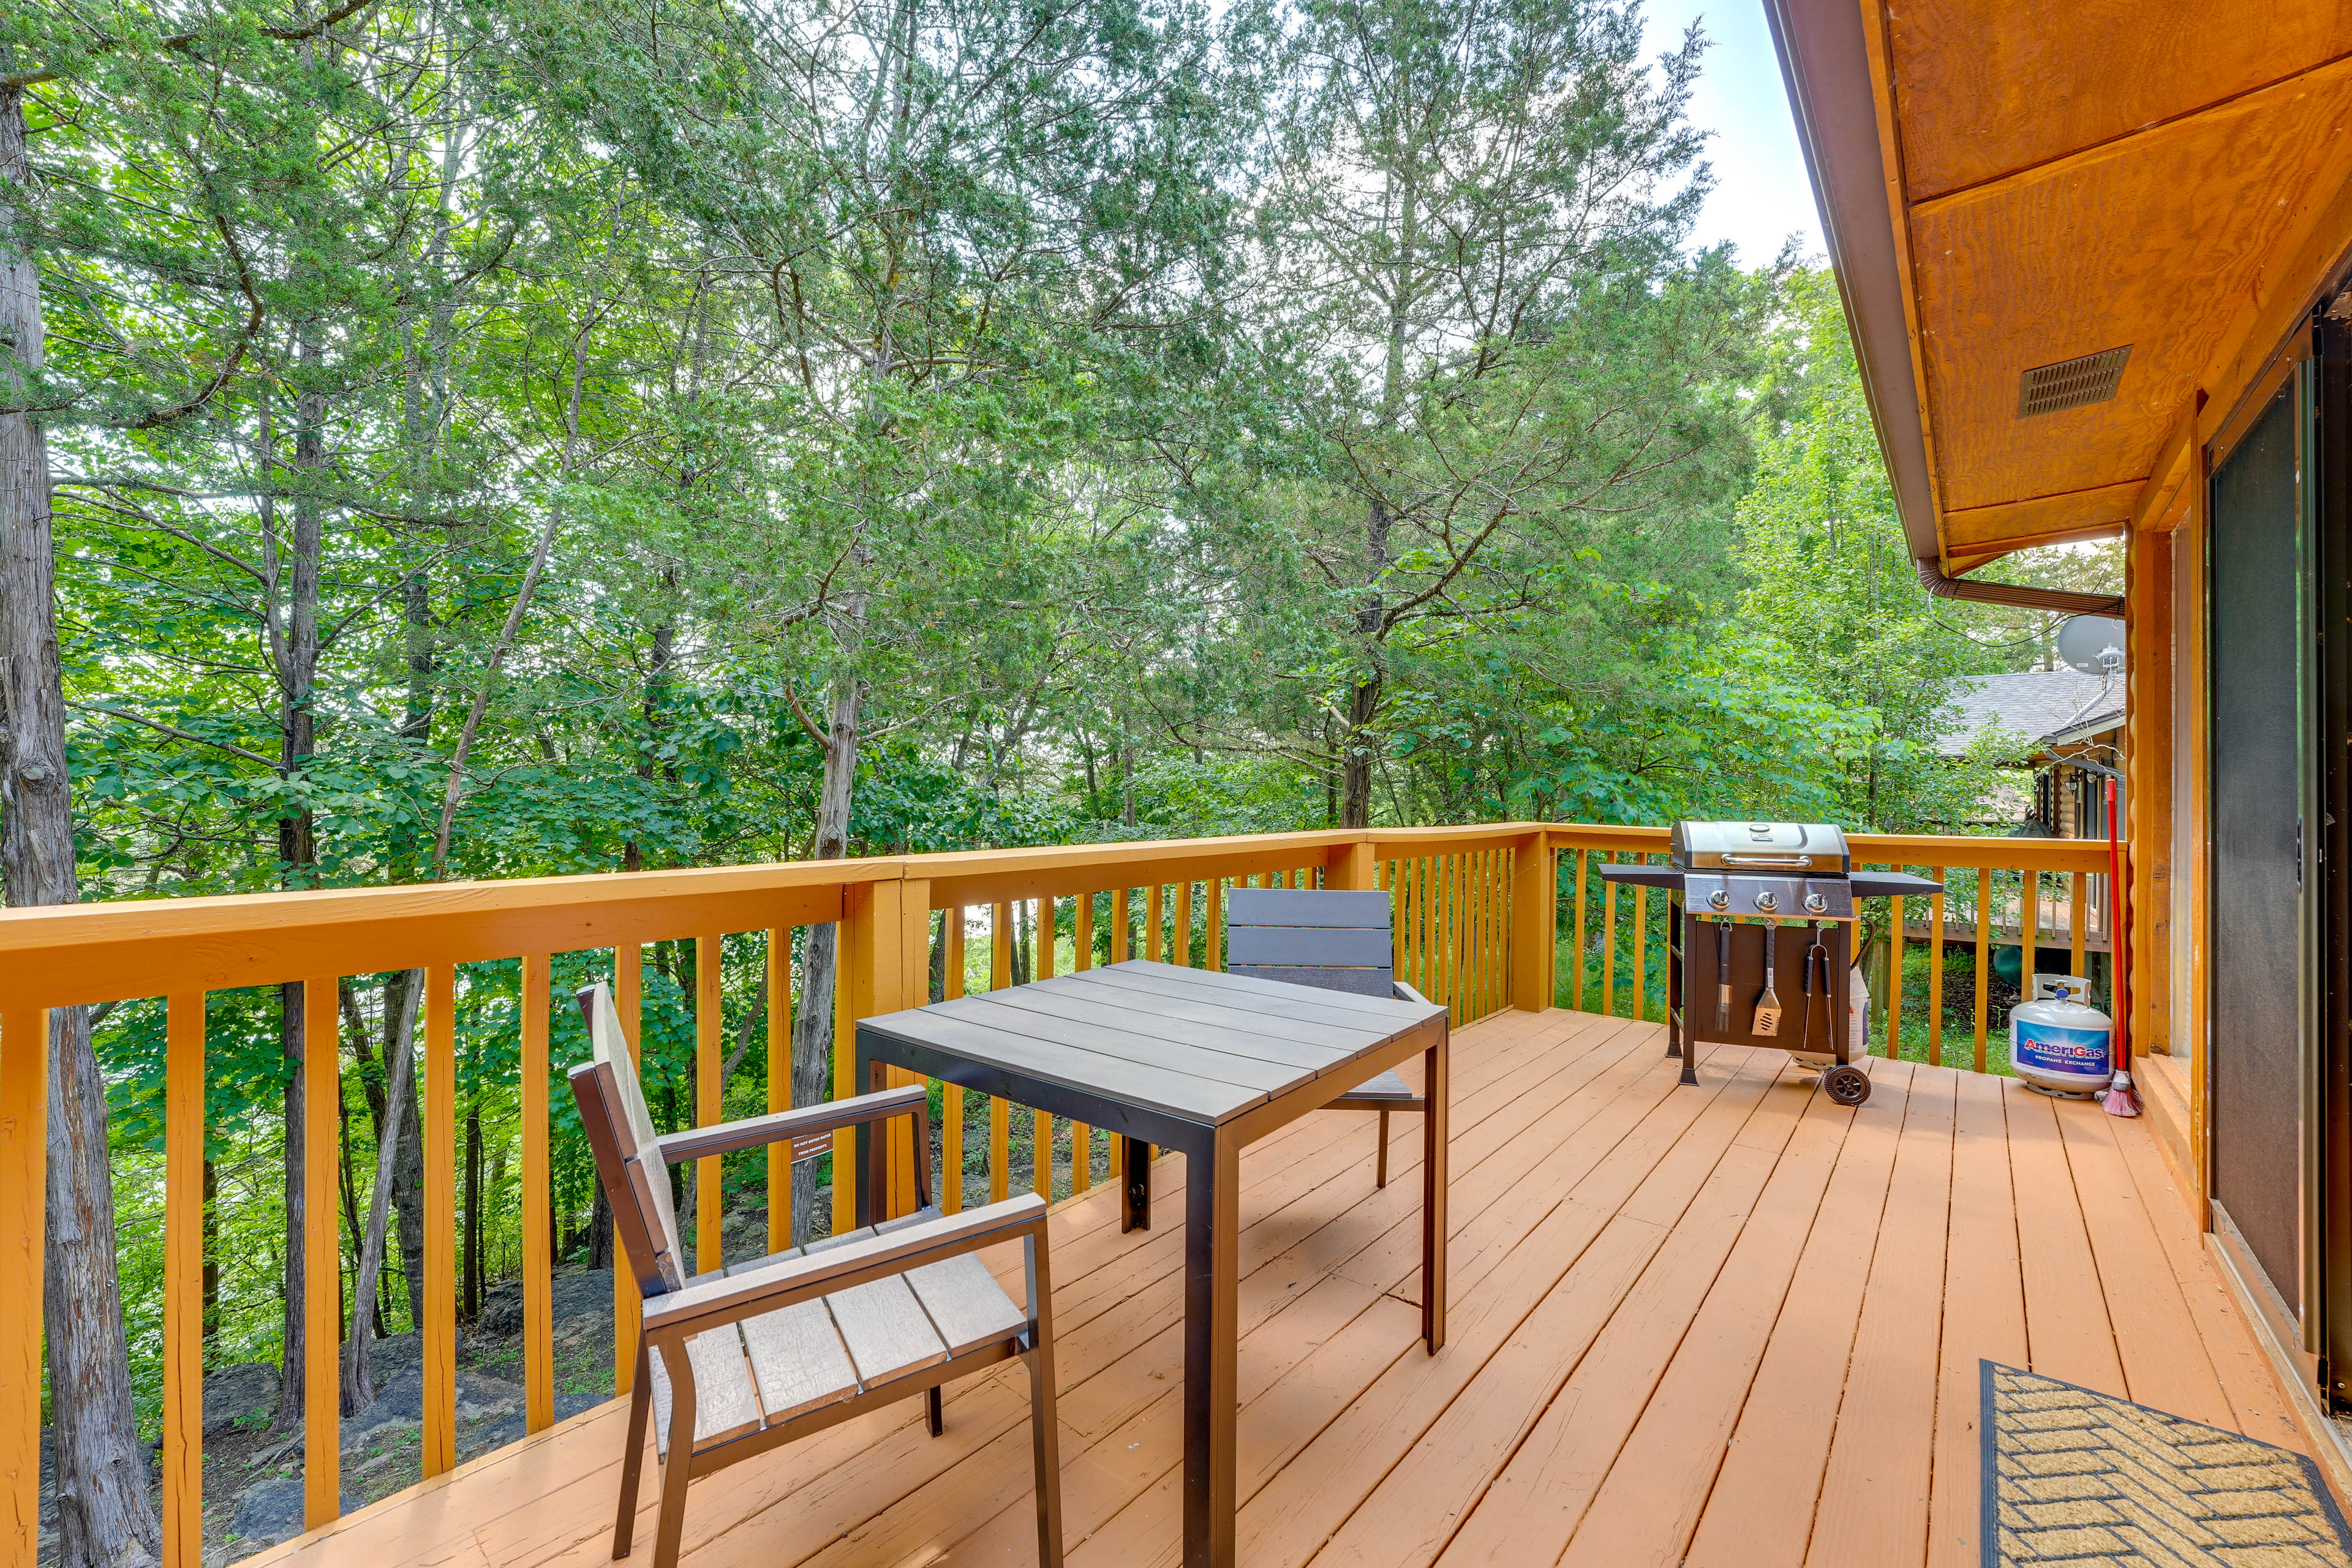 Deck | Gas Grill | Outdoor Dining Area | Lake View